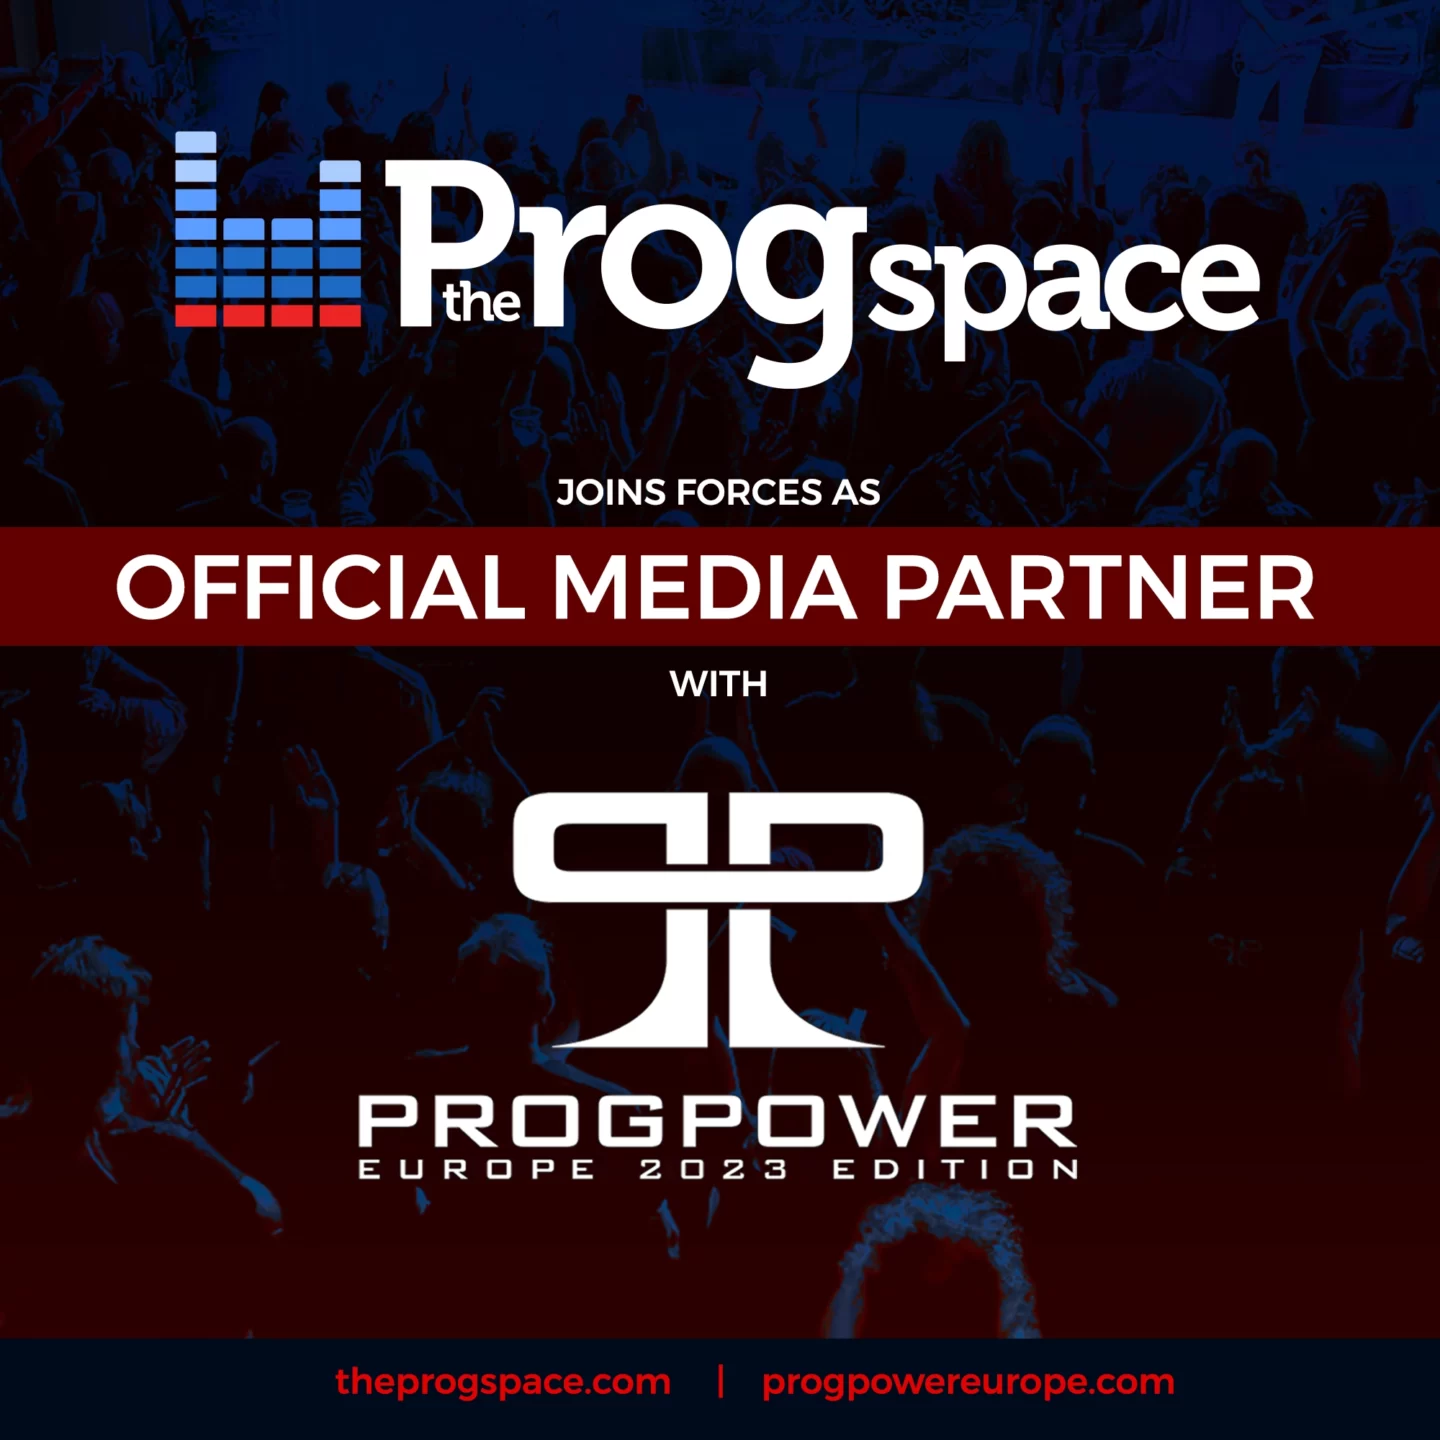 The Progspace is joining forces with ProgPower Europe as official Media Partner! 